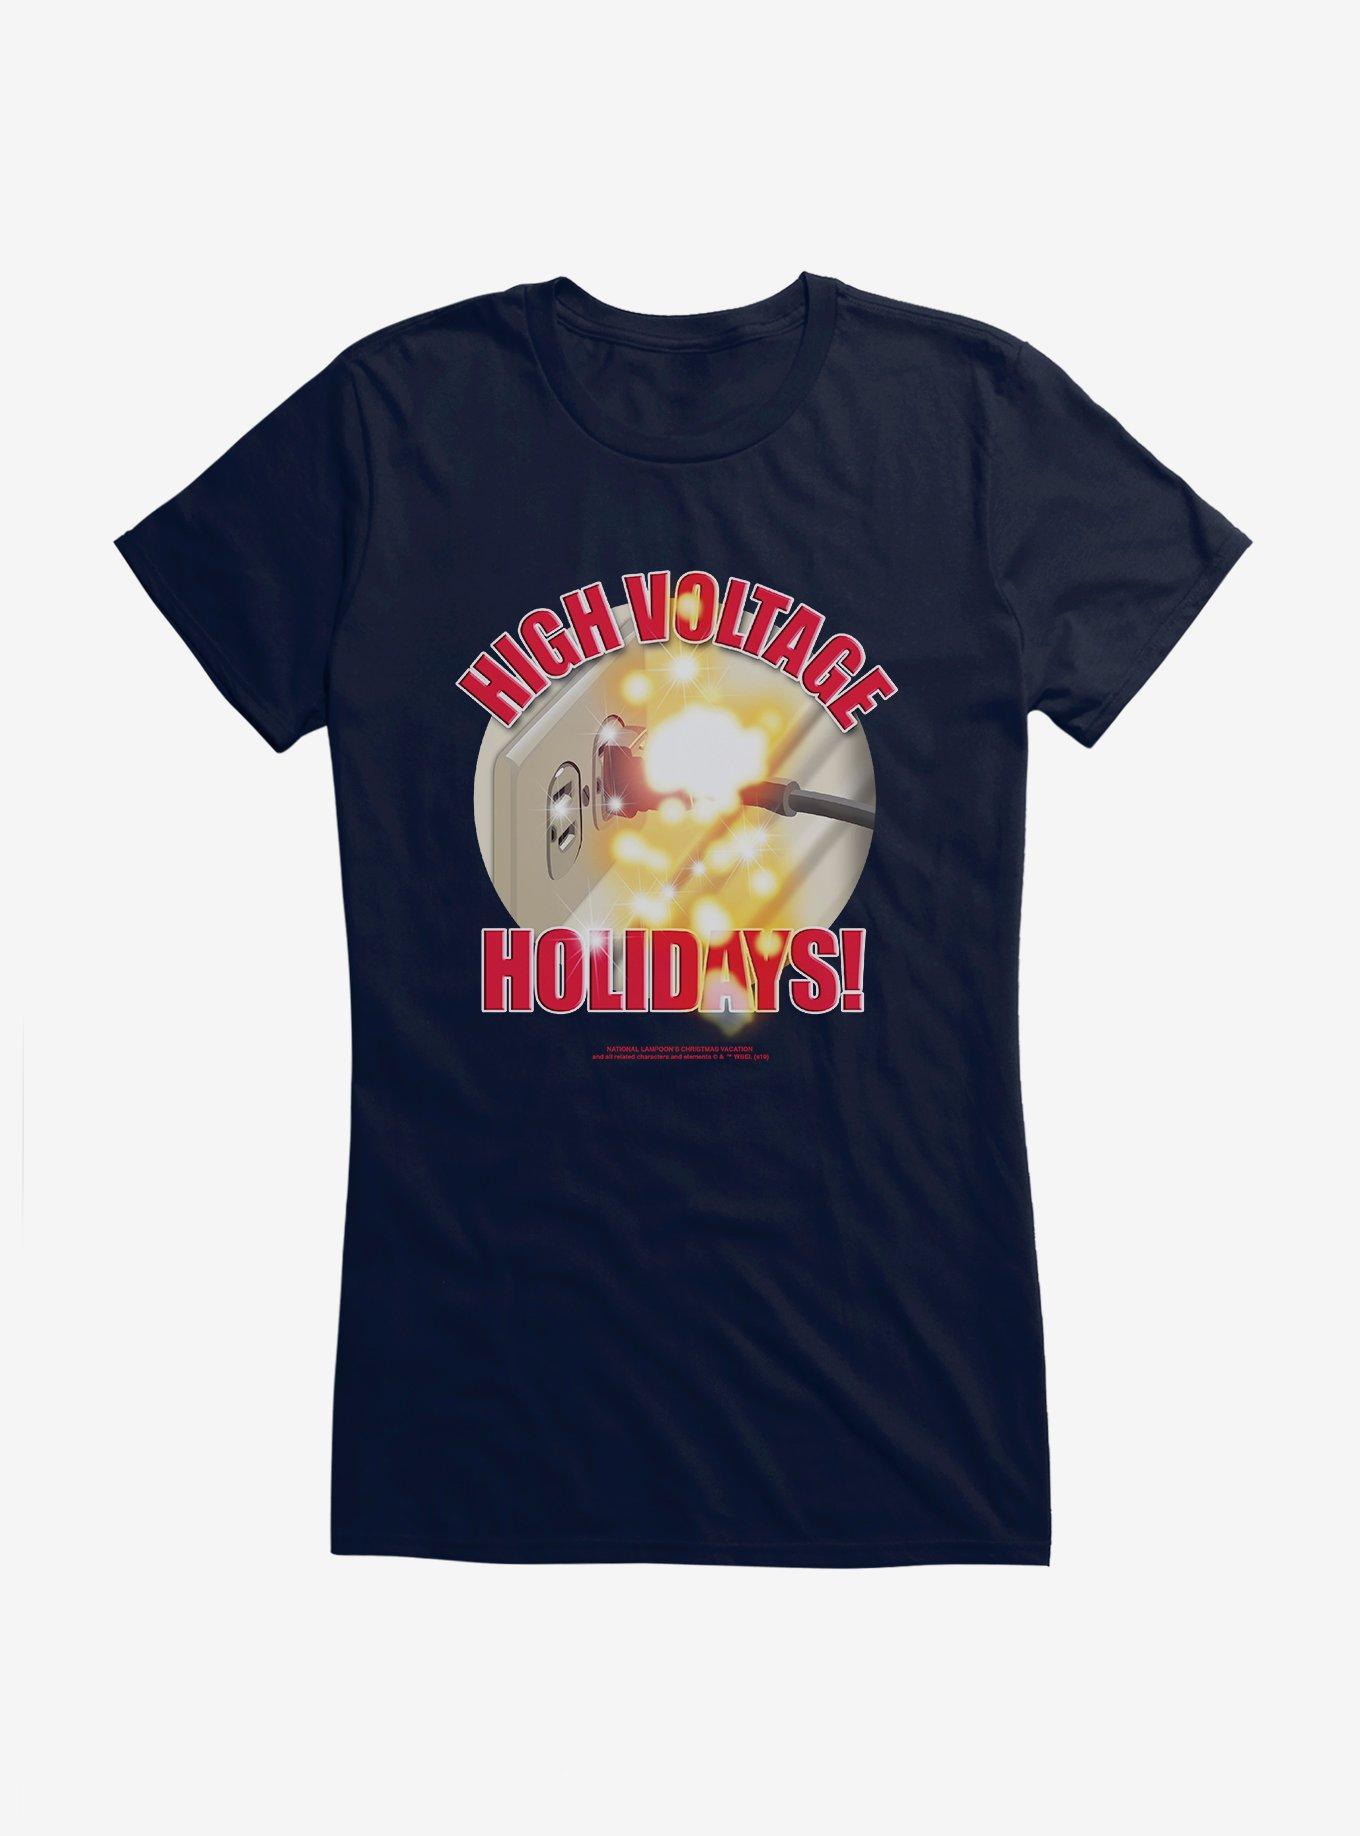 National Lampoon's Christmas Vacation High Voltage Girl's T-Shirt, NAVY, hi-res